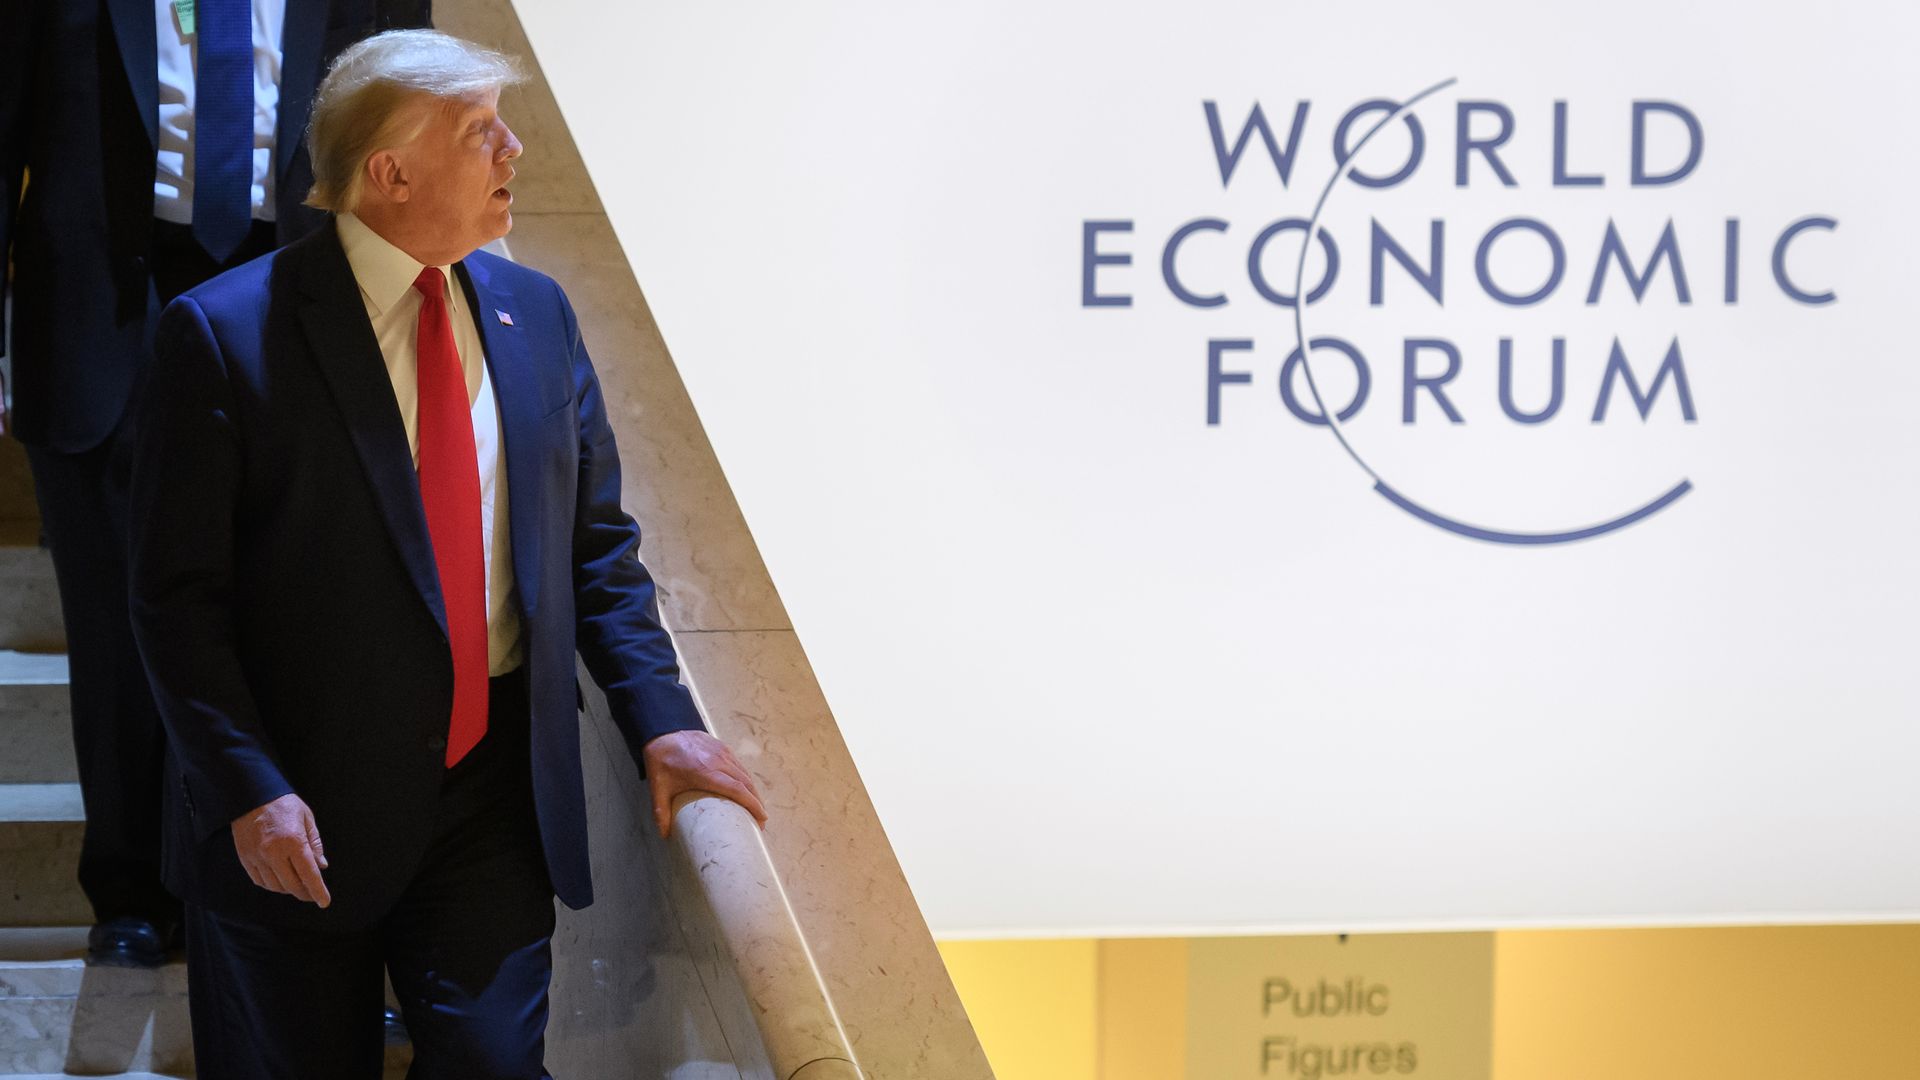 President Trump at the World Economic Forum annual meeting in Davos.